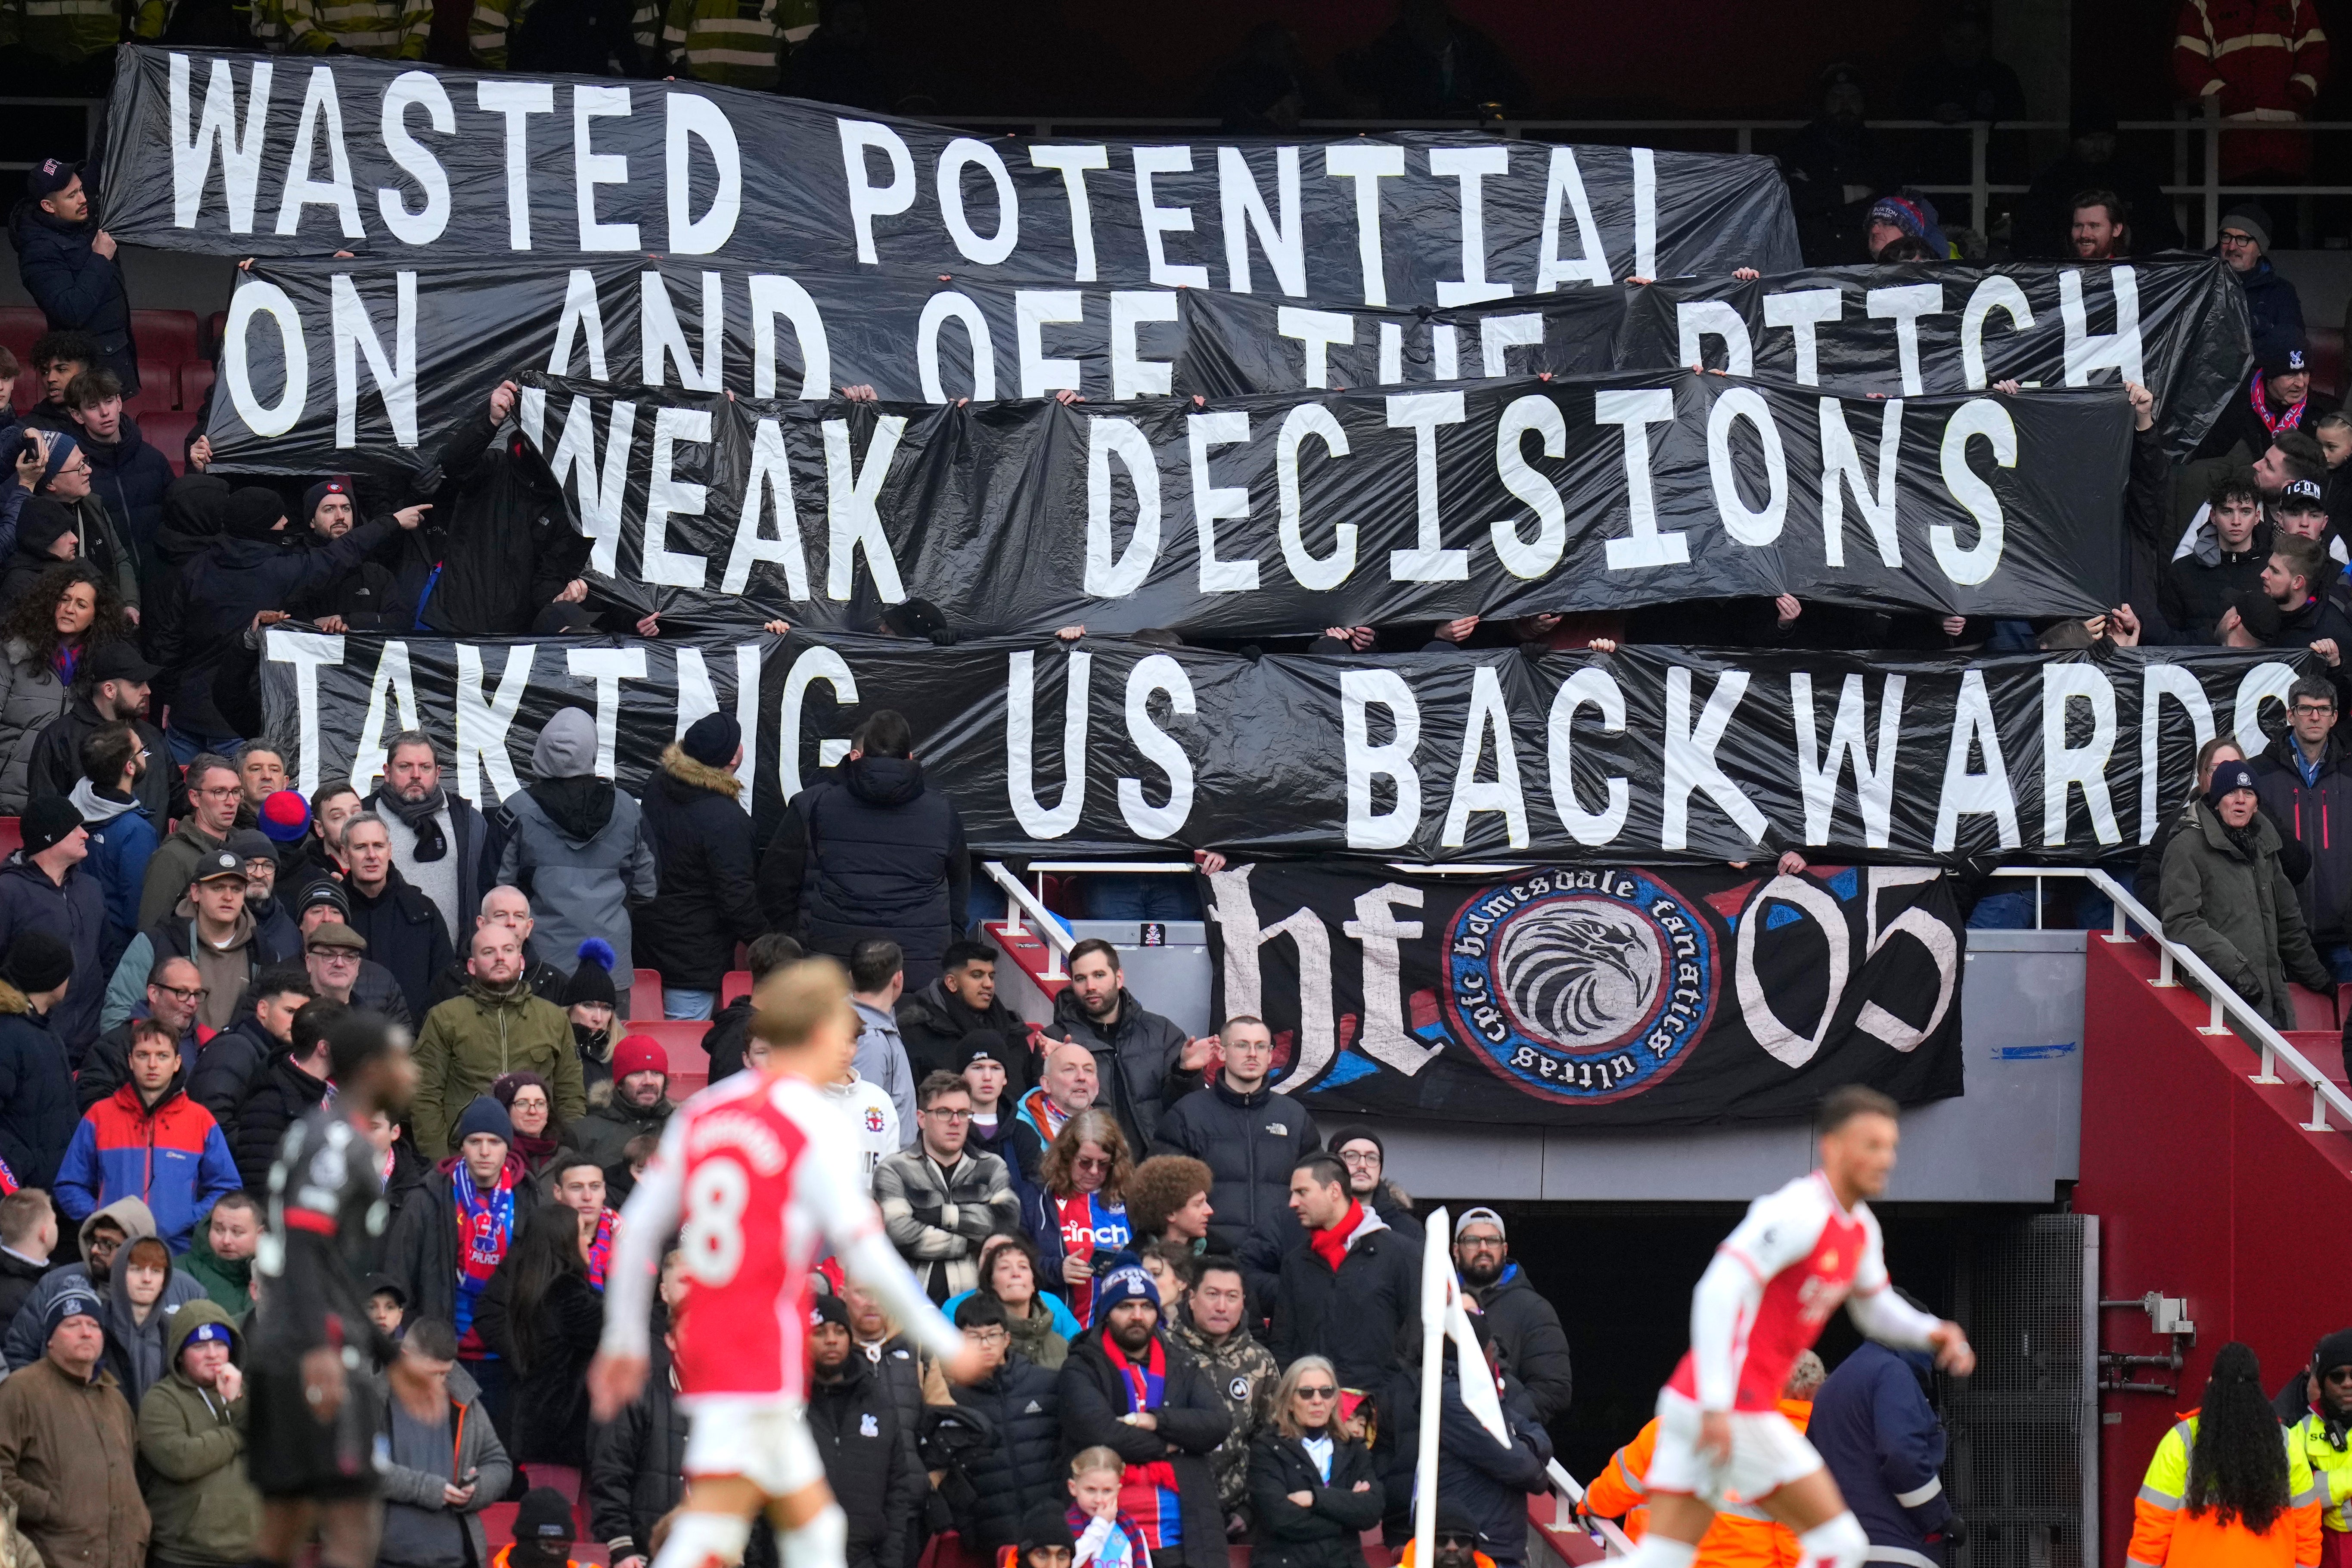 The Crystal Palace fans made their displeasure known